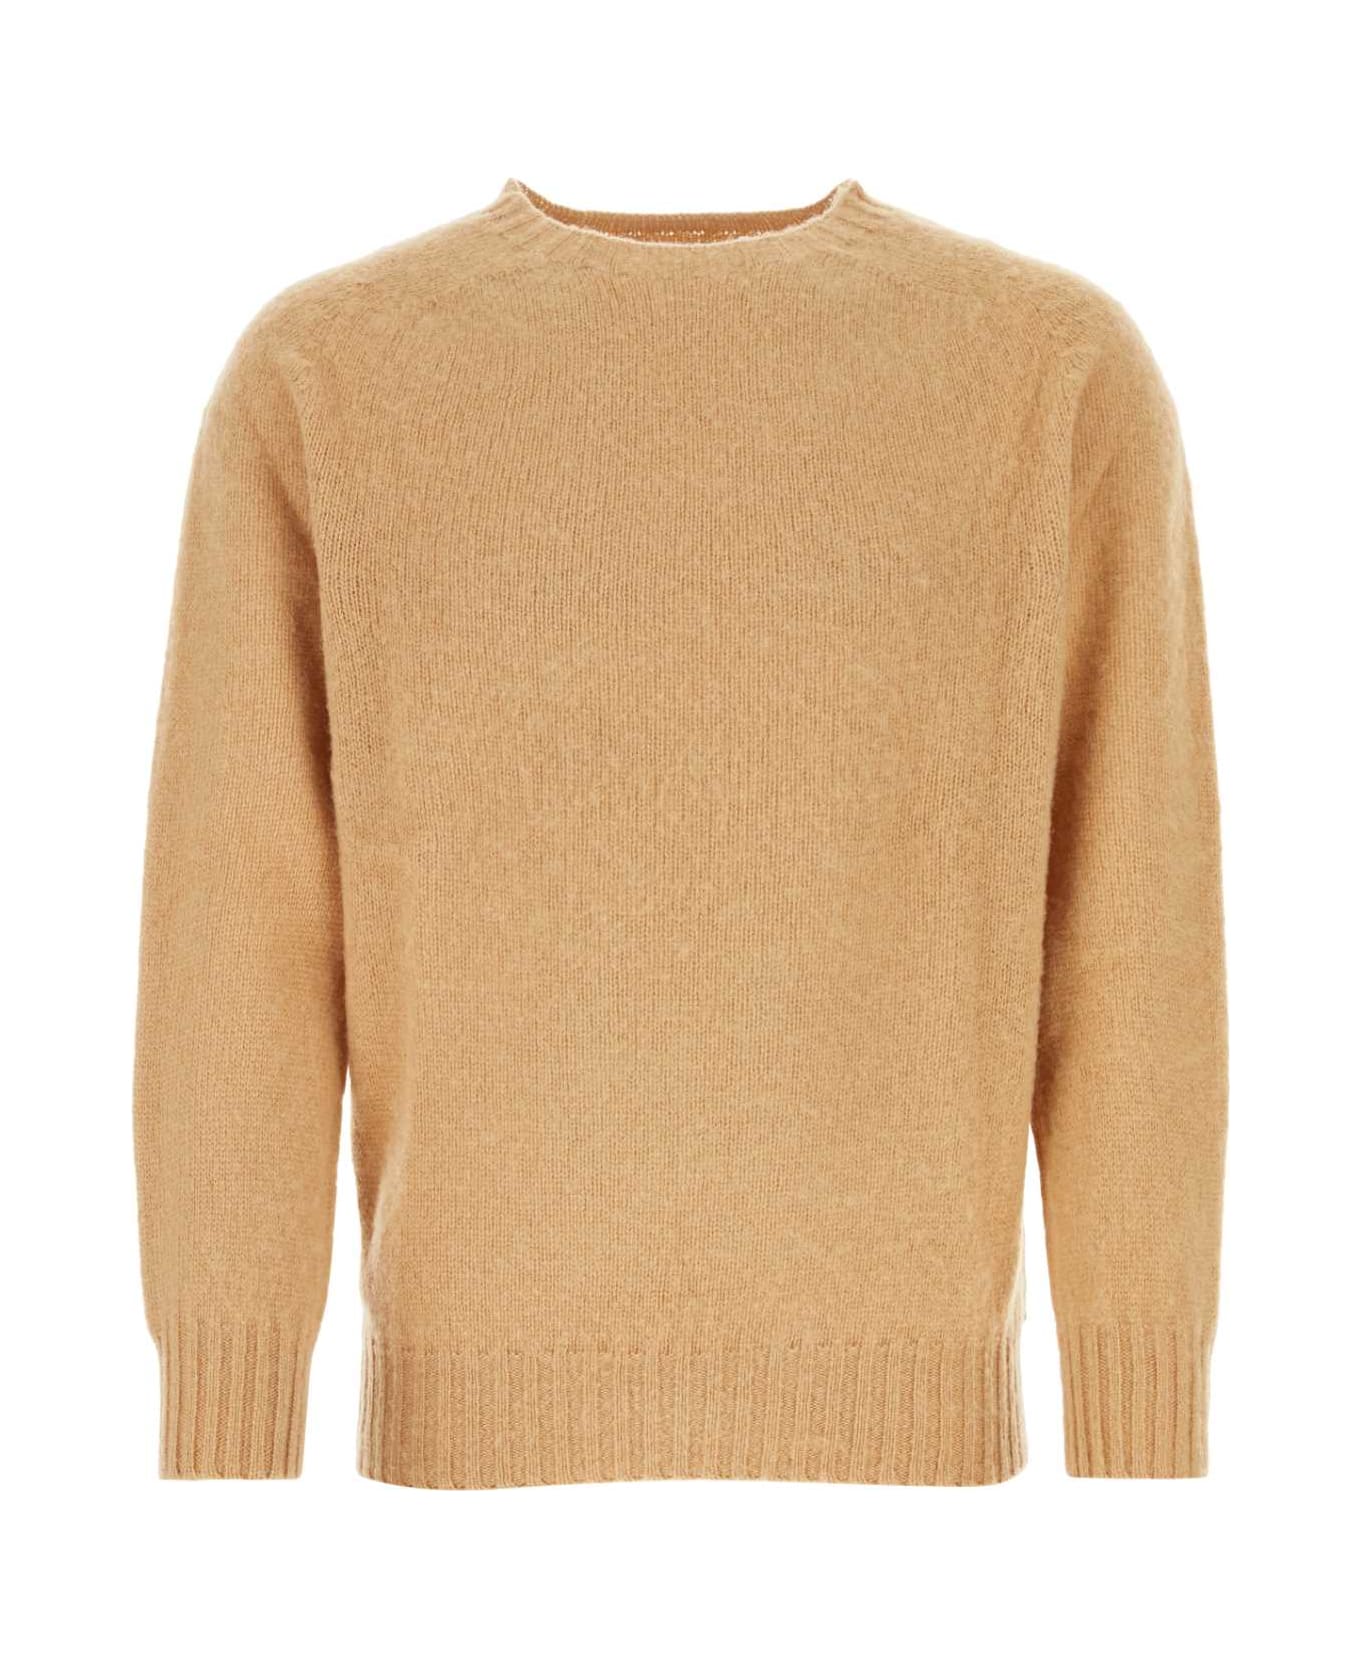 Howlin Biscuit Wool Sweater - CAMEL